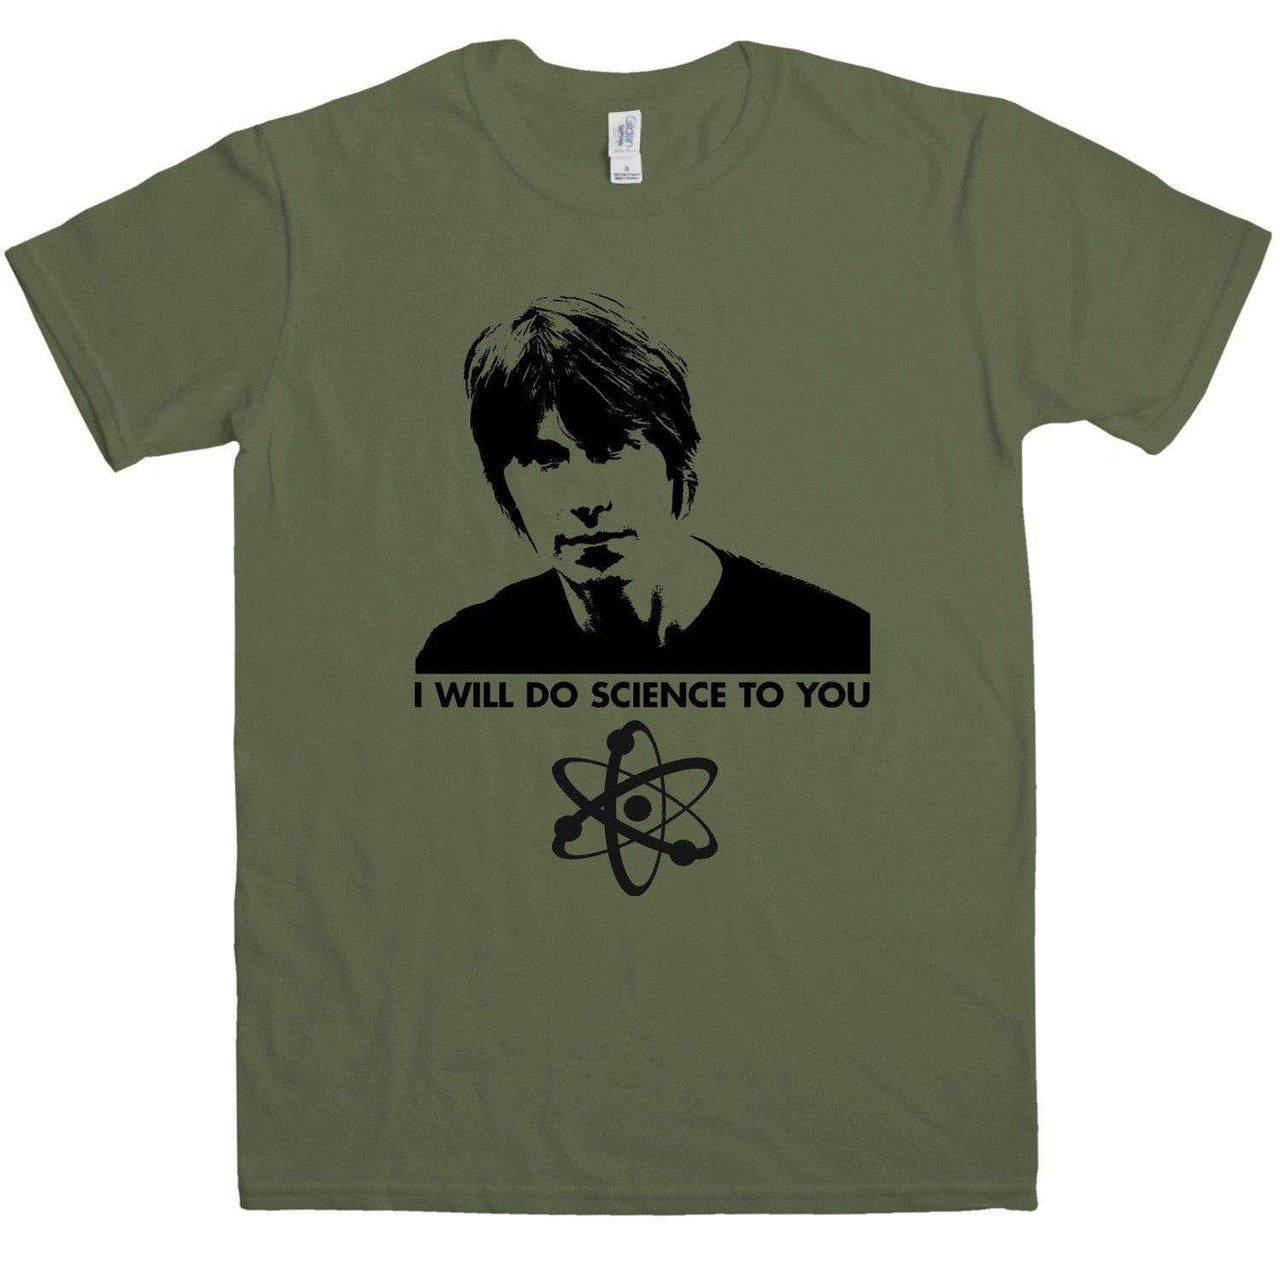 I Will Do Science To You T-Shirt For Men, Inspired By Brian Cox 8Ball